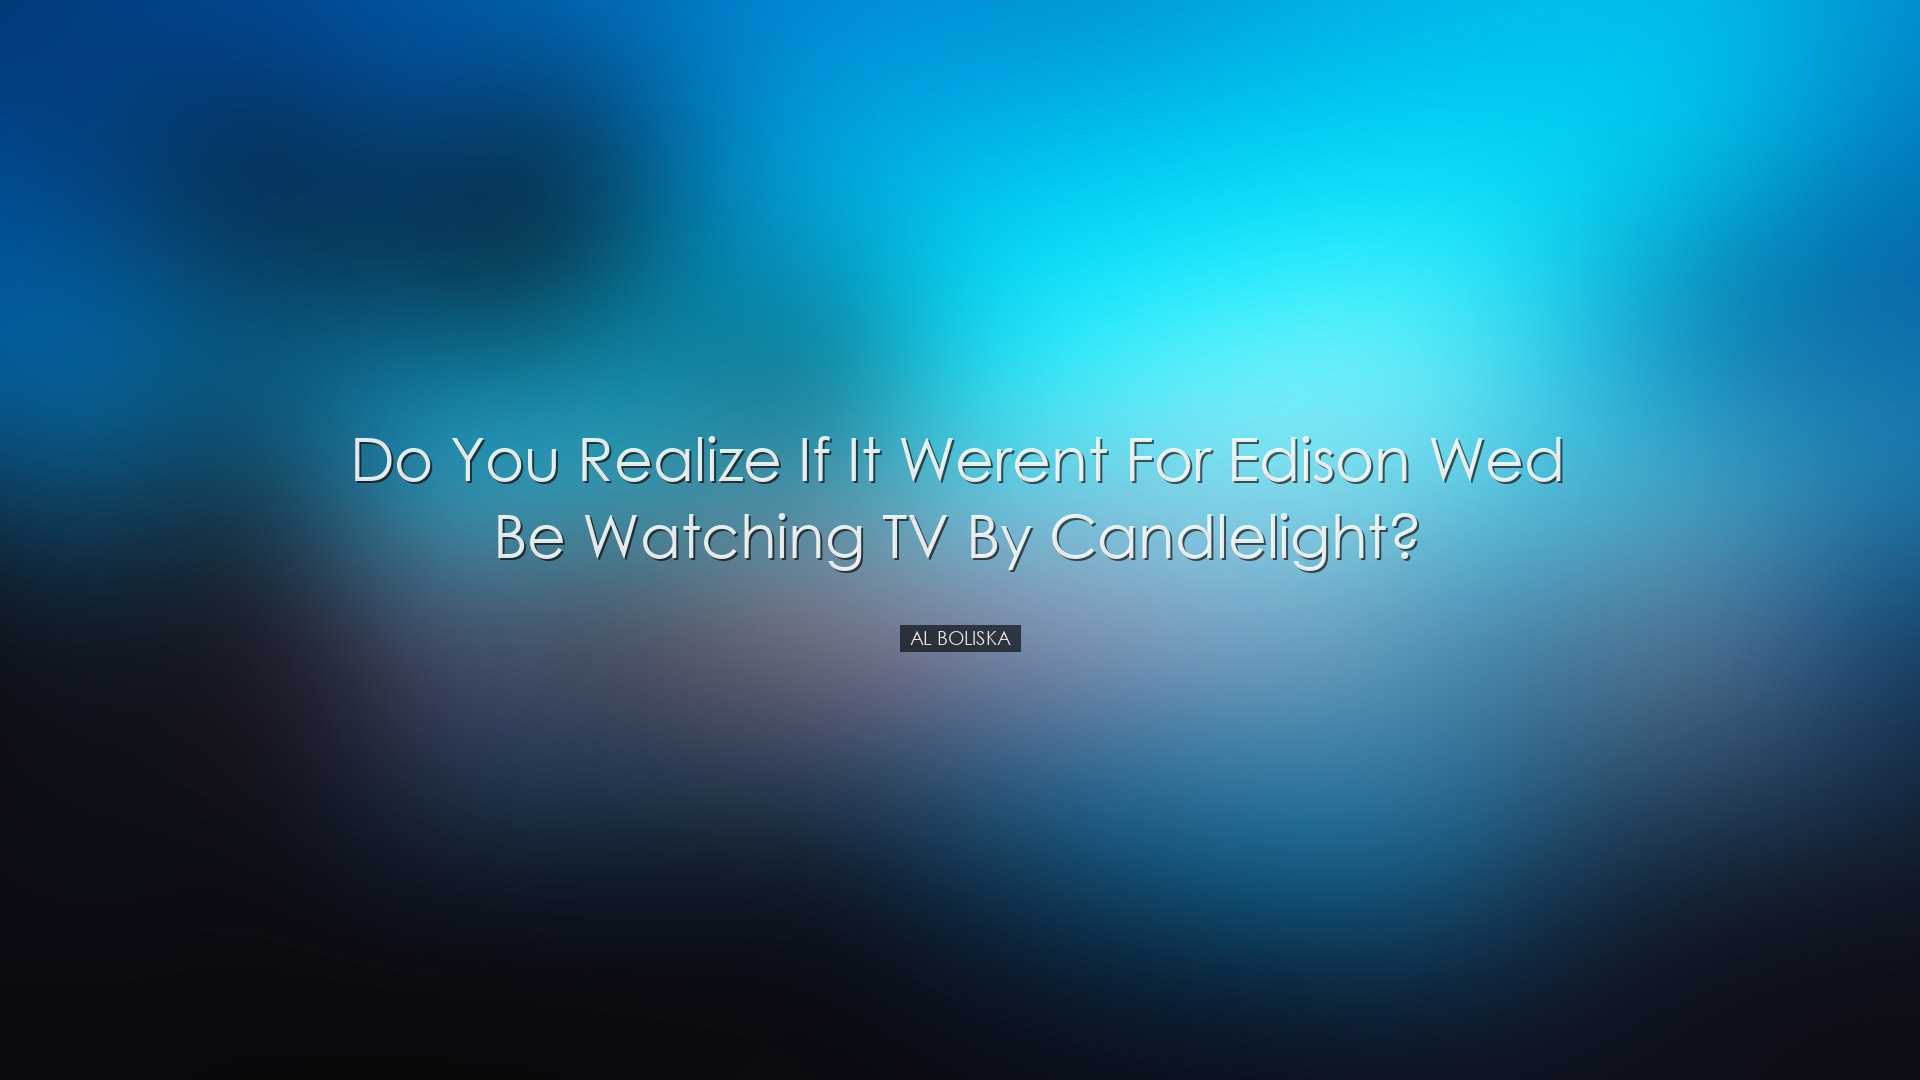 Do you realize if it werent for Edison wed be watching TV by candl